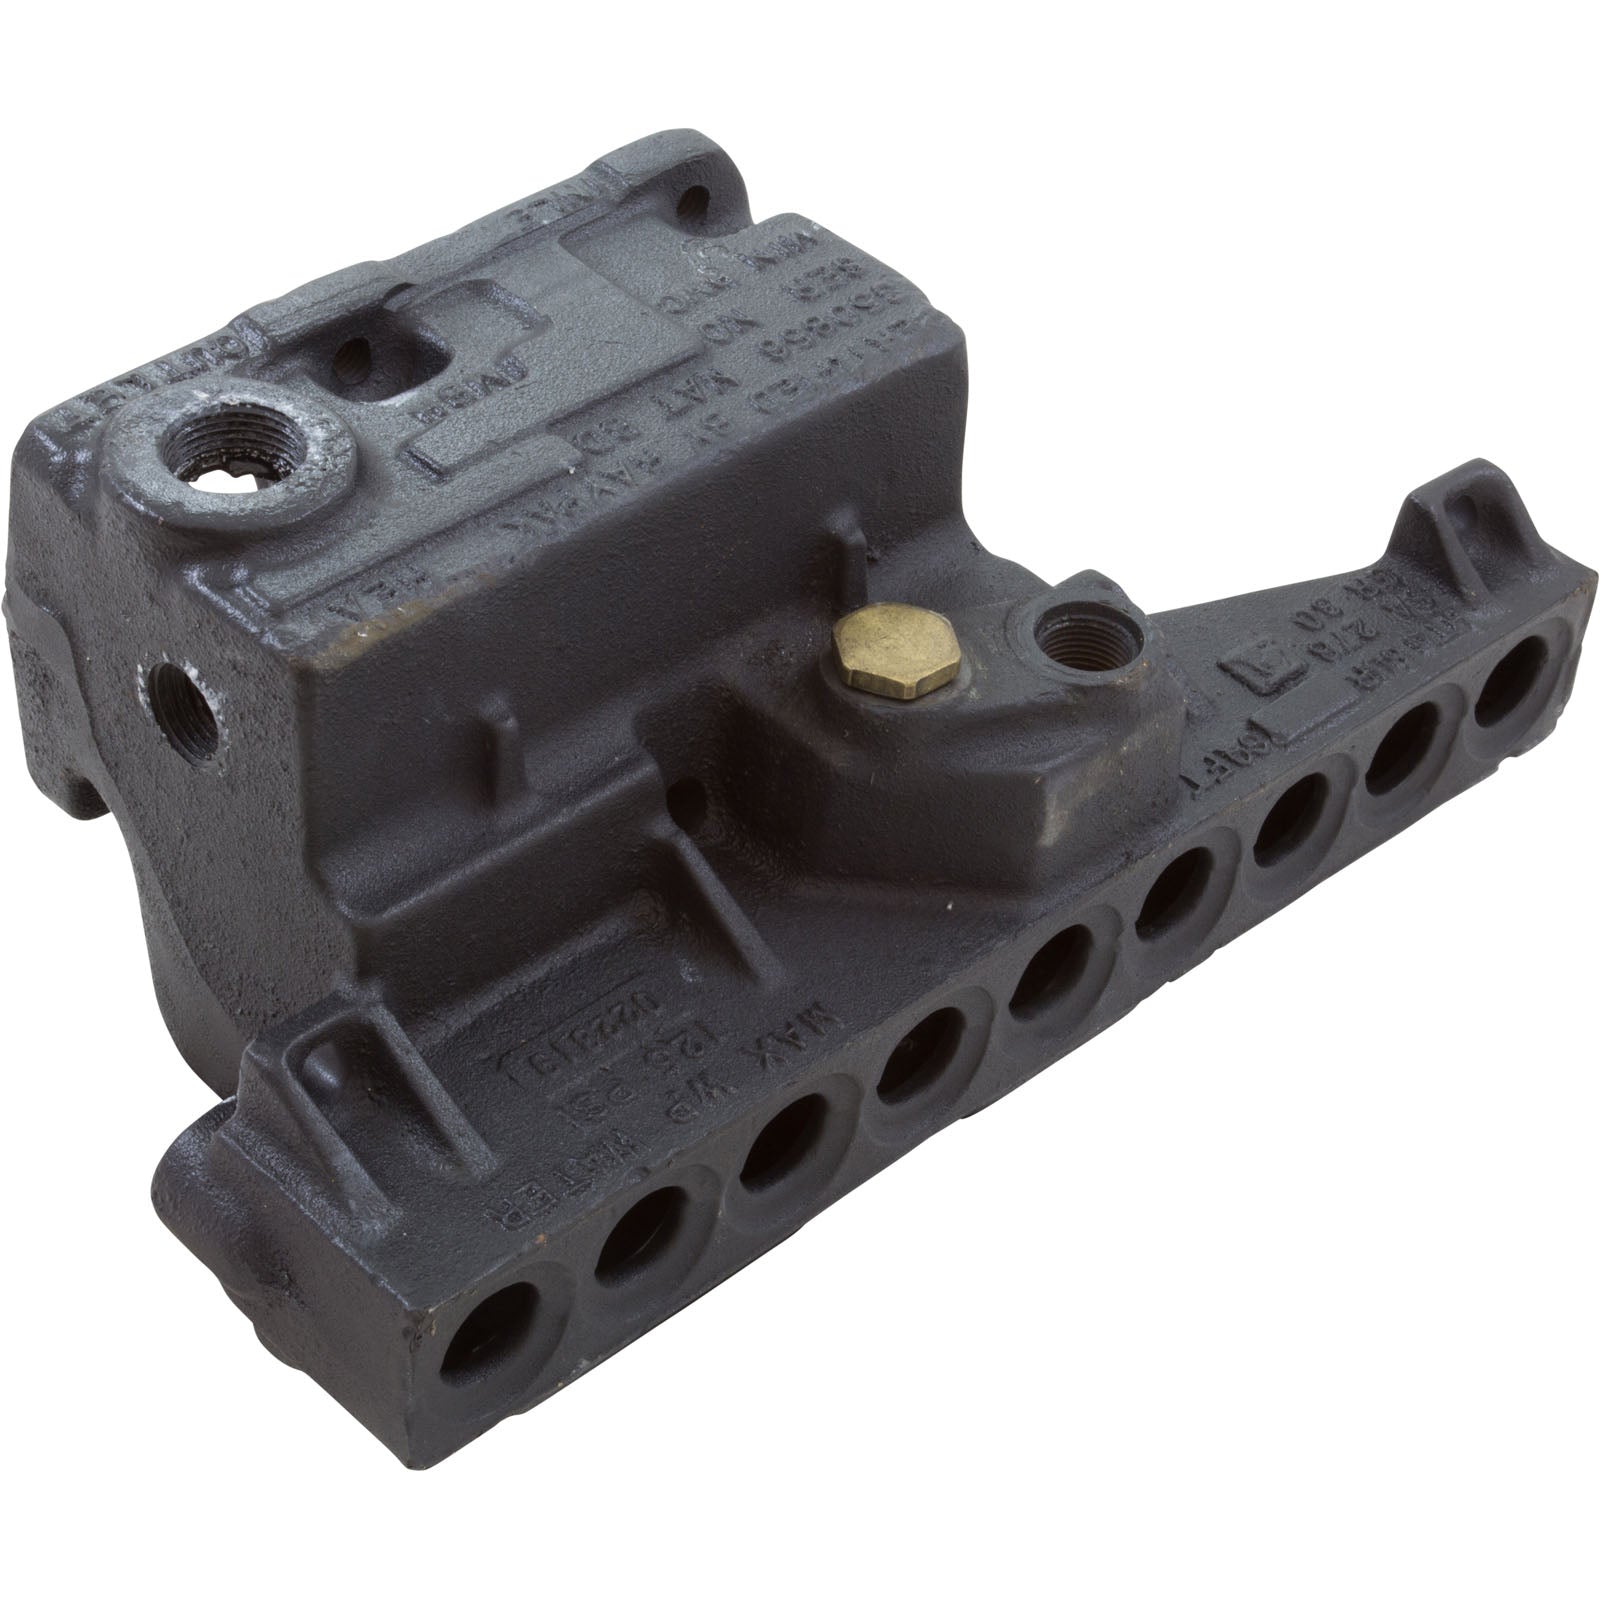 Header Cast Iron, Inlet/Outlet, Raypak 003759F